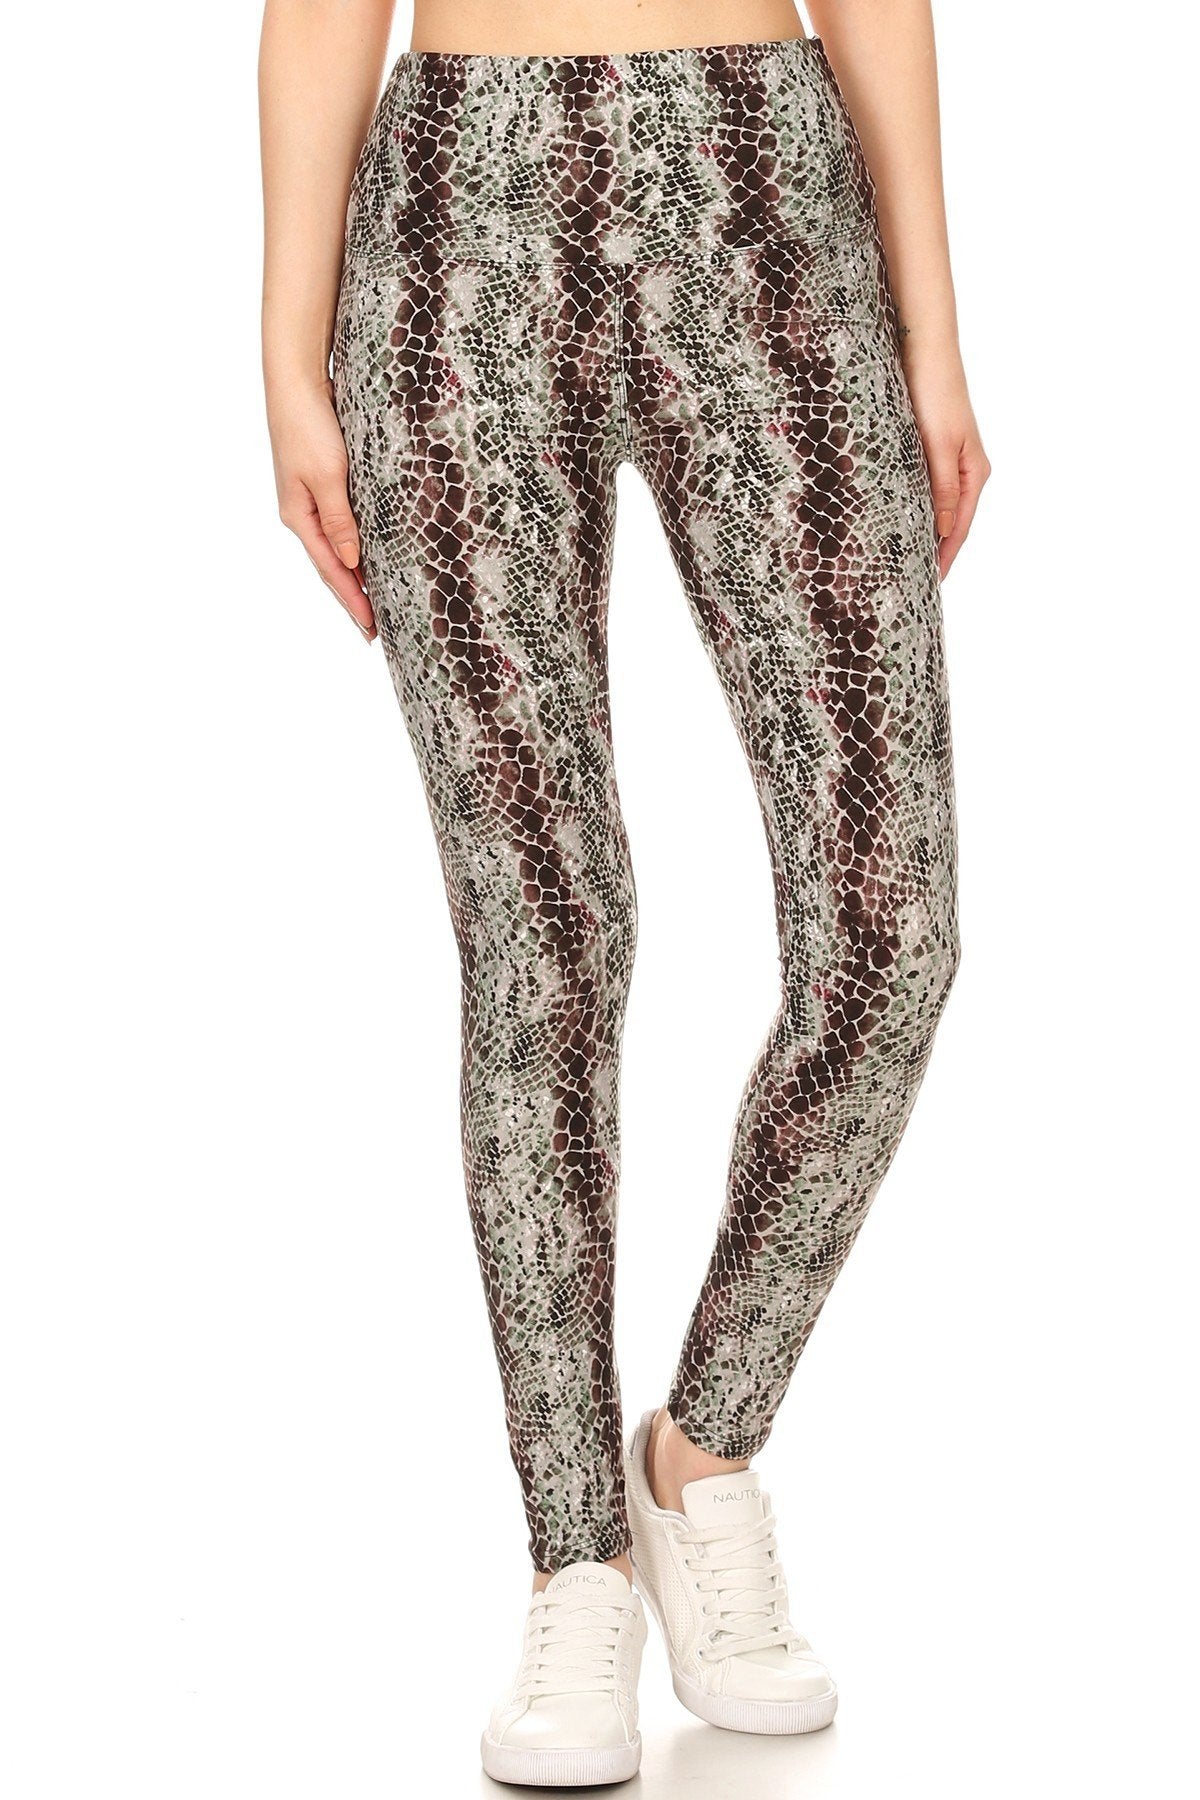 Yoga Style Banded Lined Snakeskin Printed Knit Legging With High Waist. - K I T S H O P 